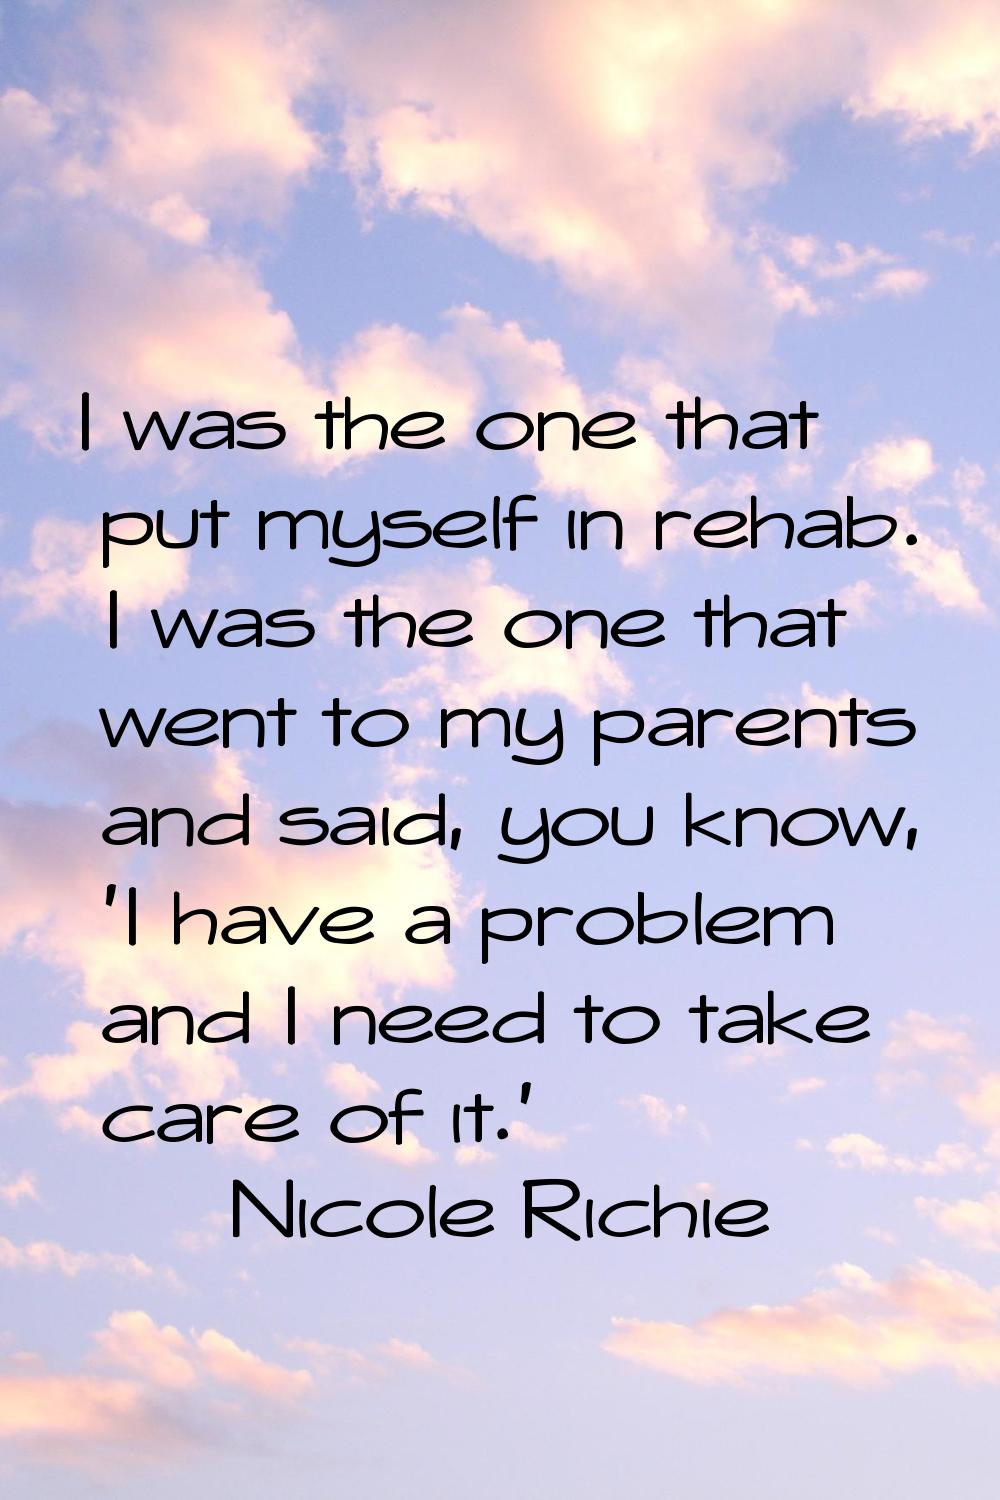 I was the one that put myself in rehab. I was the one that went to my parents and said, you know, '